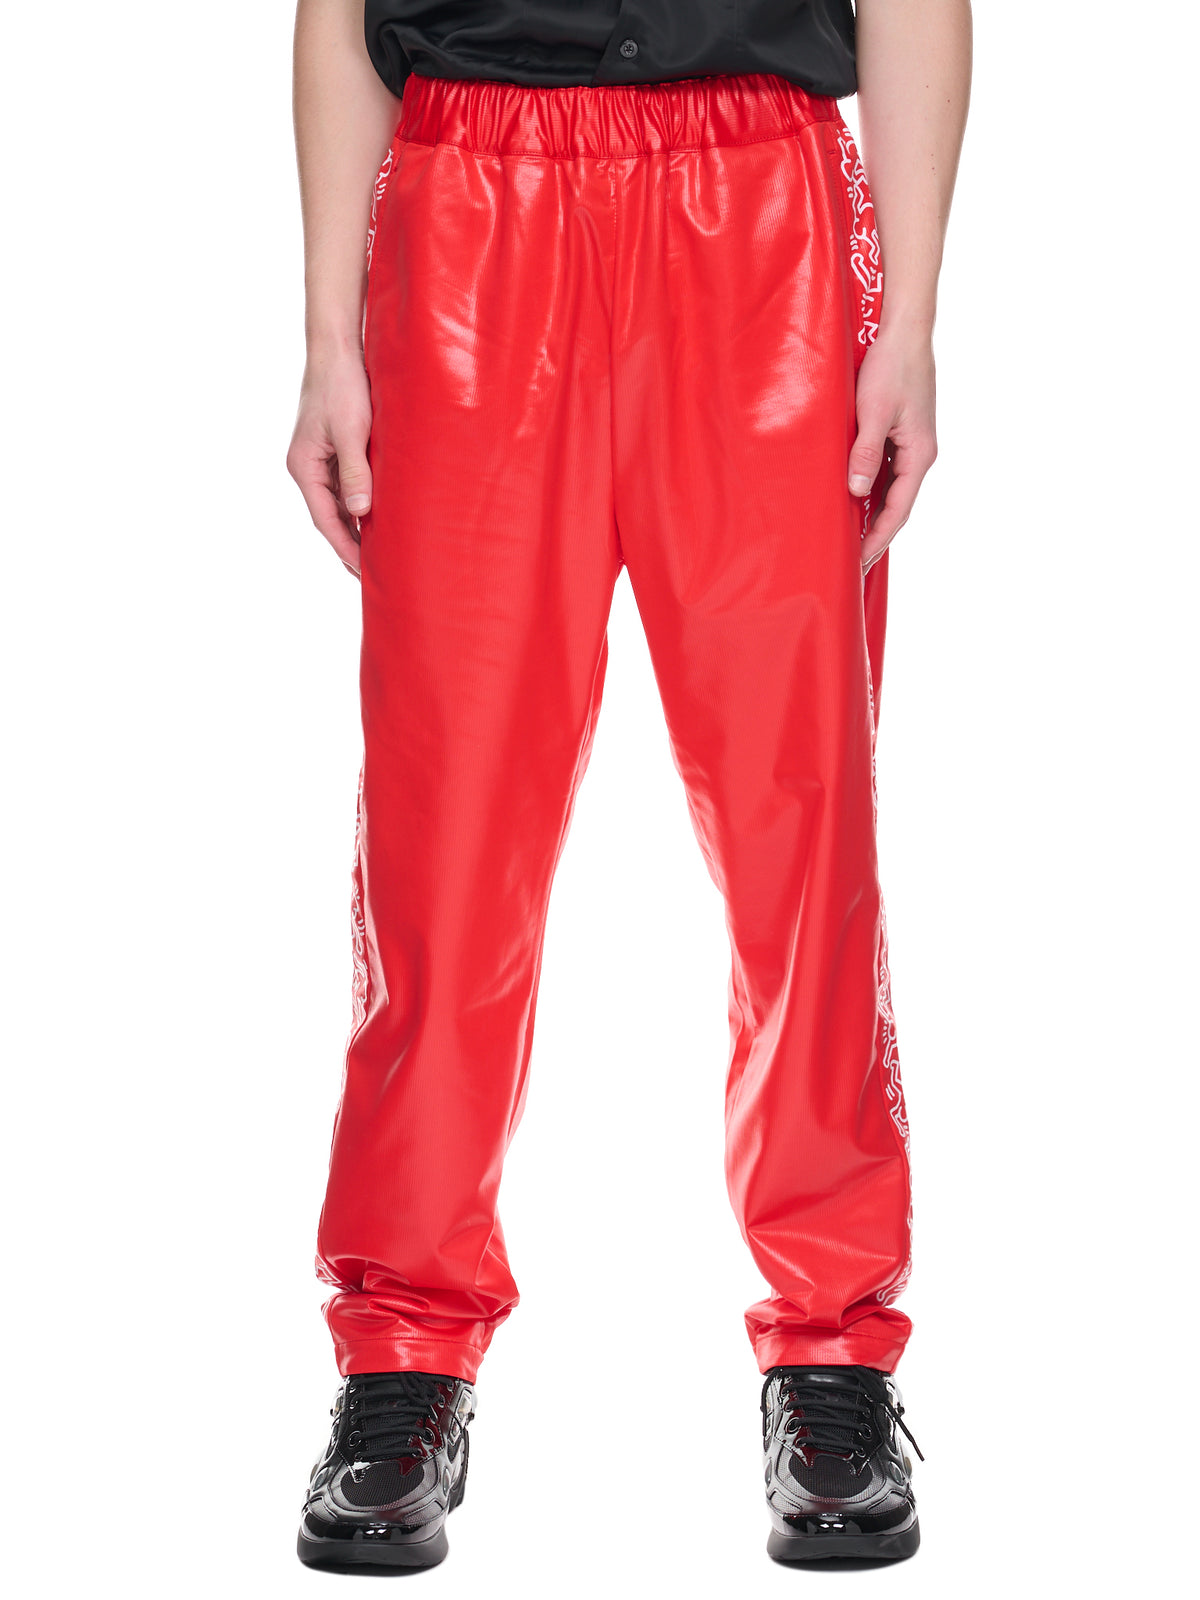 Keith Haring Pants (WK-P019-051-RED-WHITE)